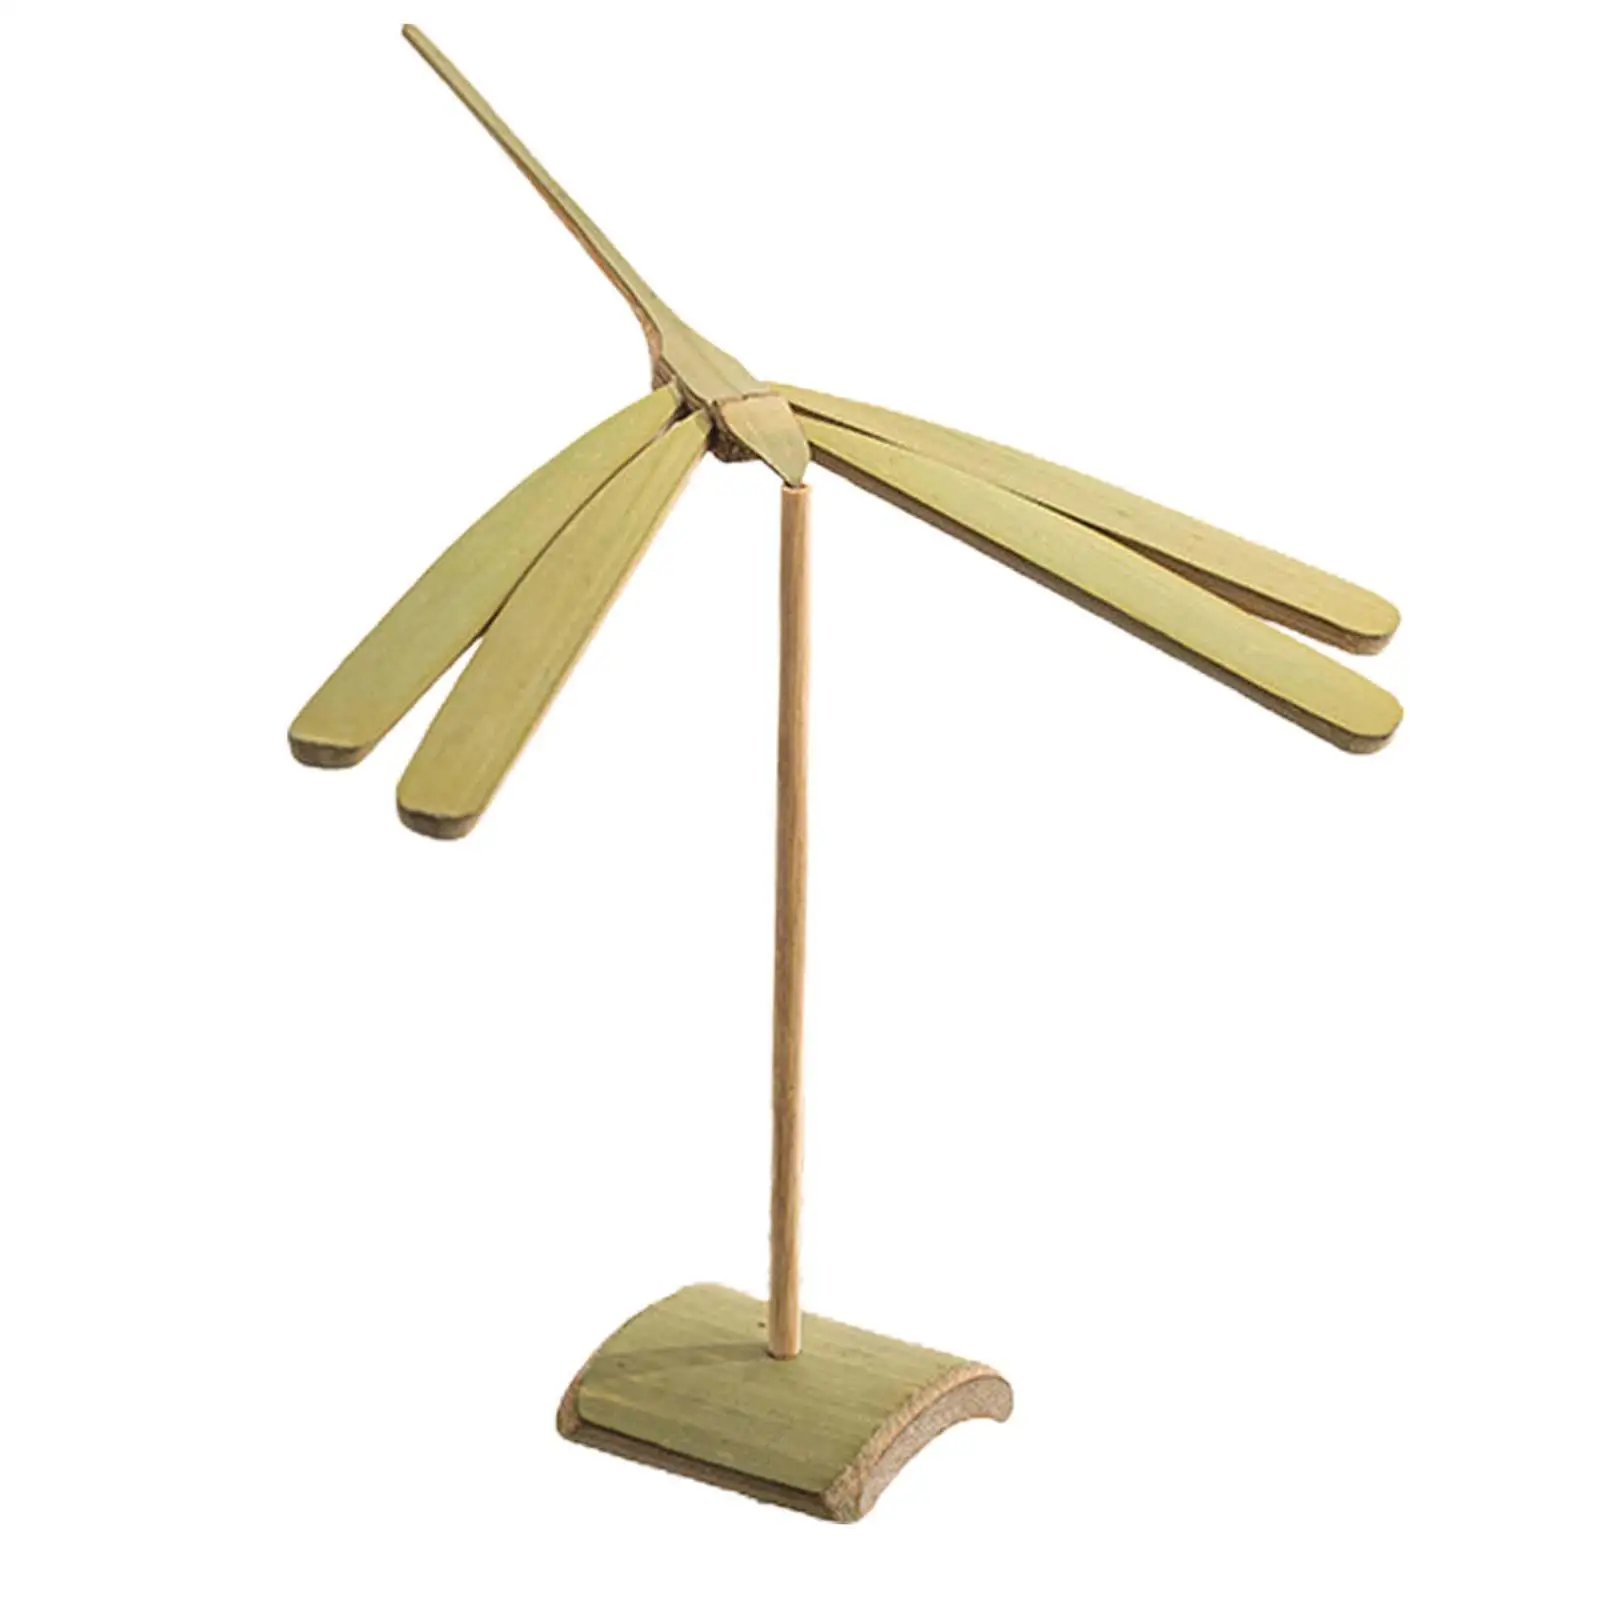 Bamboo Dragonfly Toy Handmade Educational with Stable Base Flying Helicopter Toy for Aniversary Holidays Party Favor Bedroom